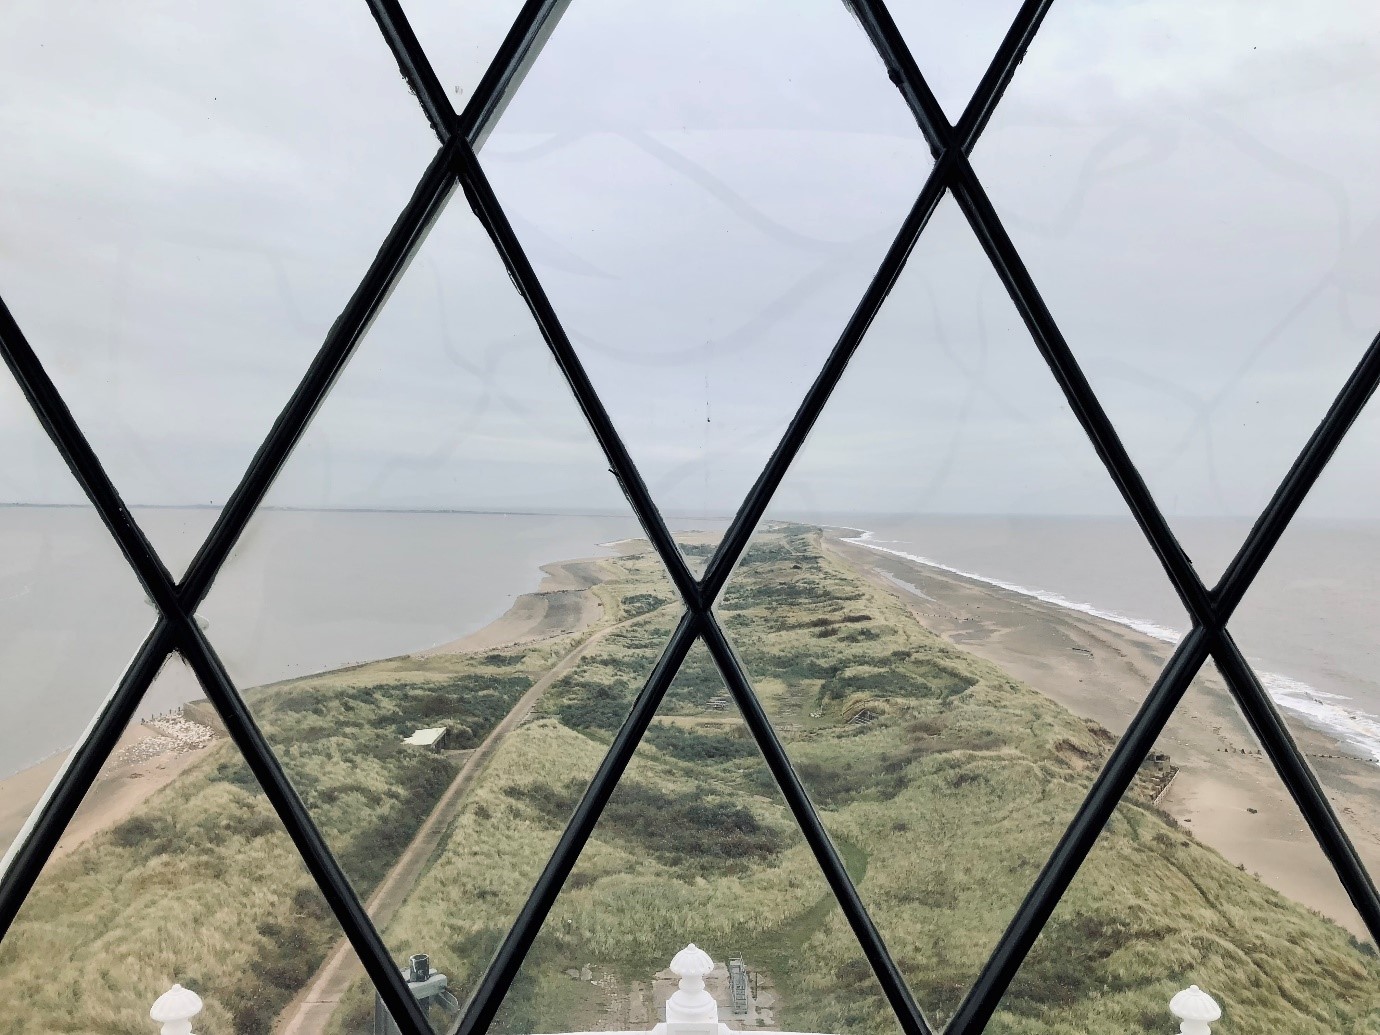 A view from the top of Spurn Point lighthouse looking out to the end of the narrow spit of land with the sea and the Humber Estuary either side